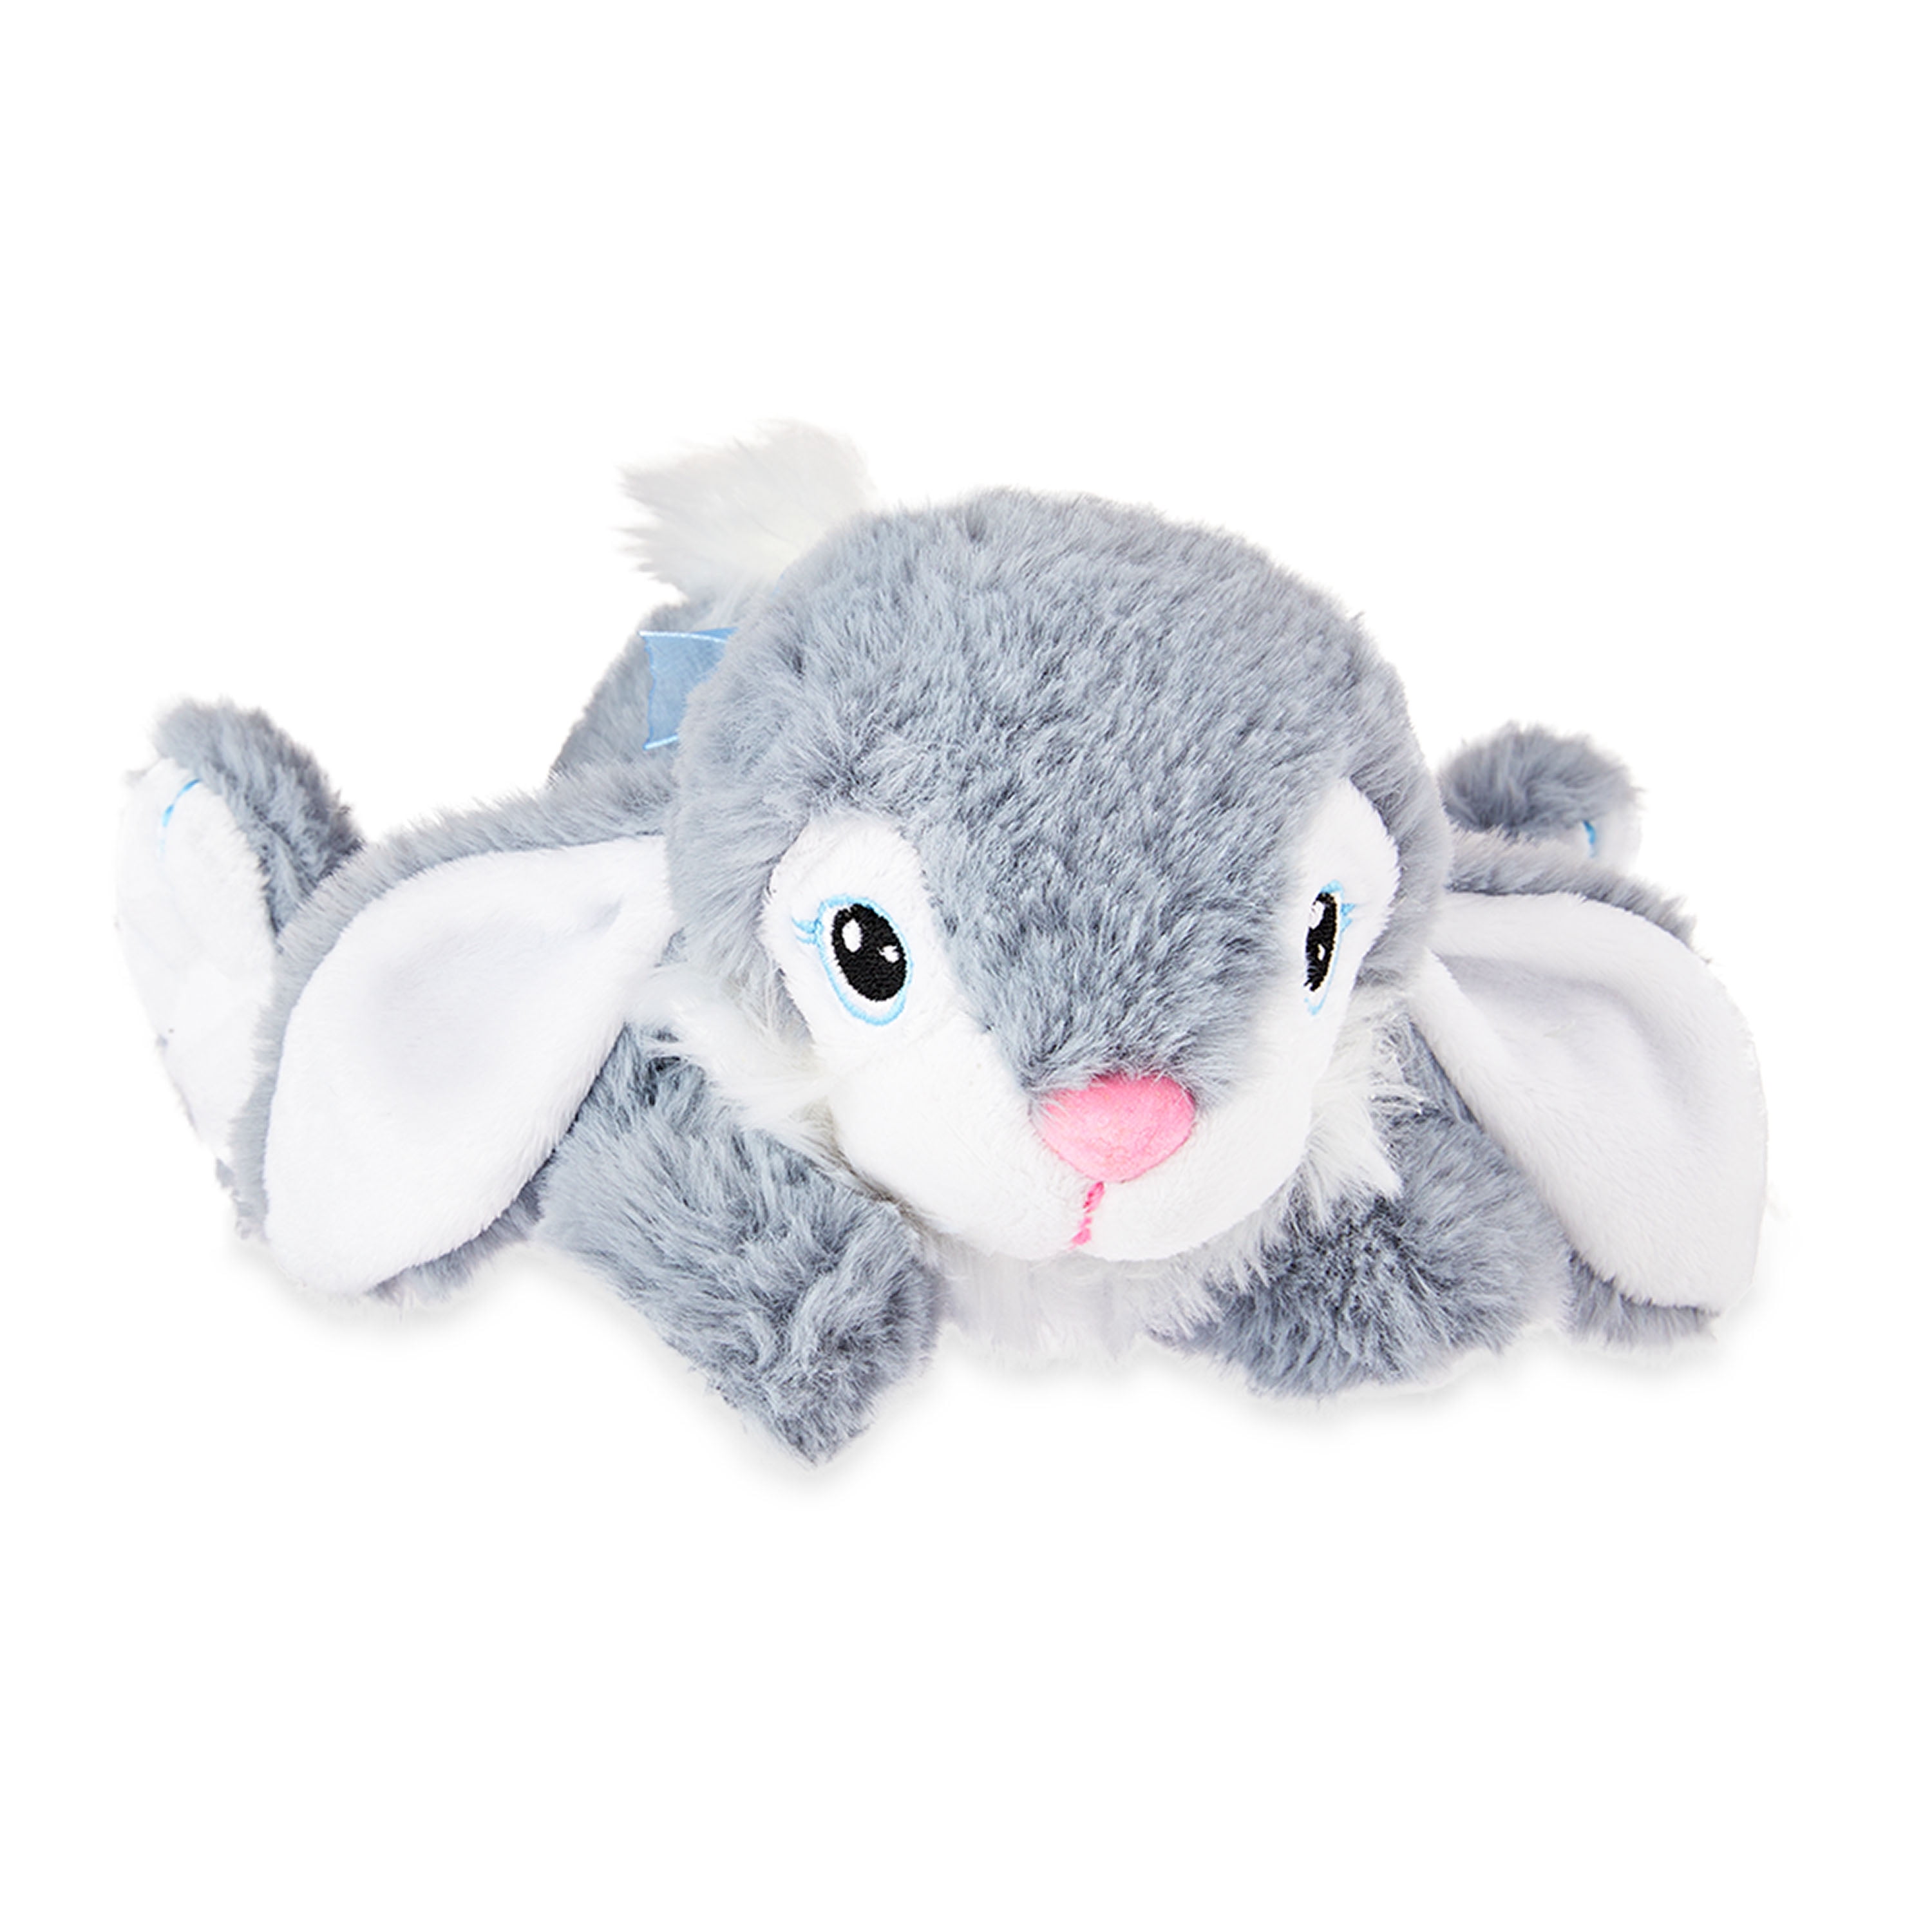 "Way to Celebrate! Easter Small HappyHopsterBunny Plush Toy, Grey"